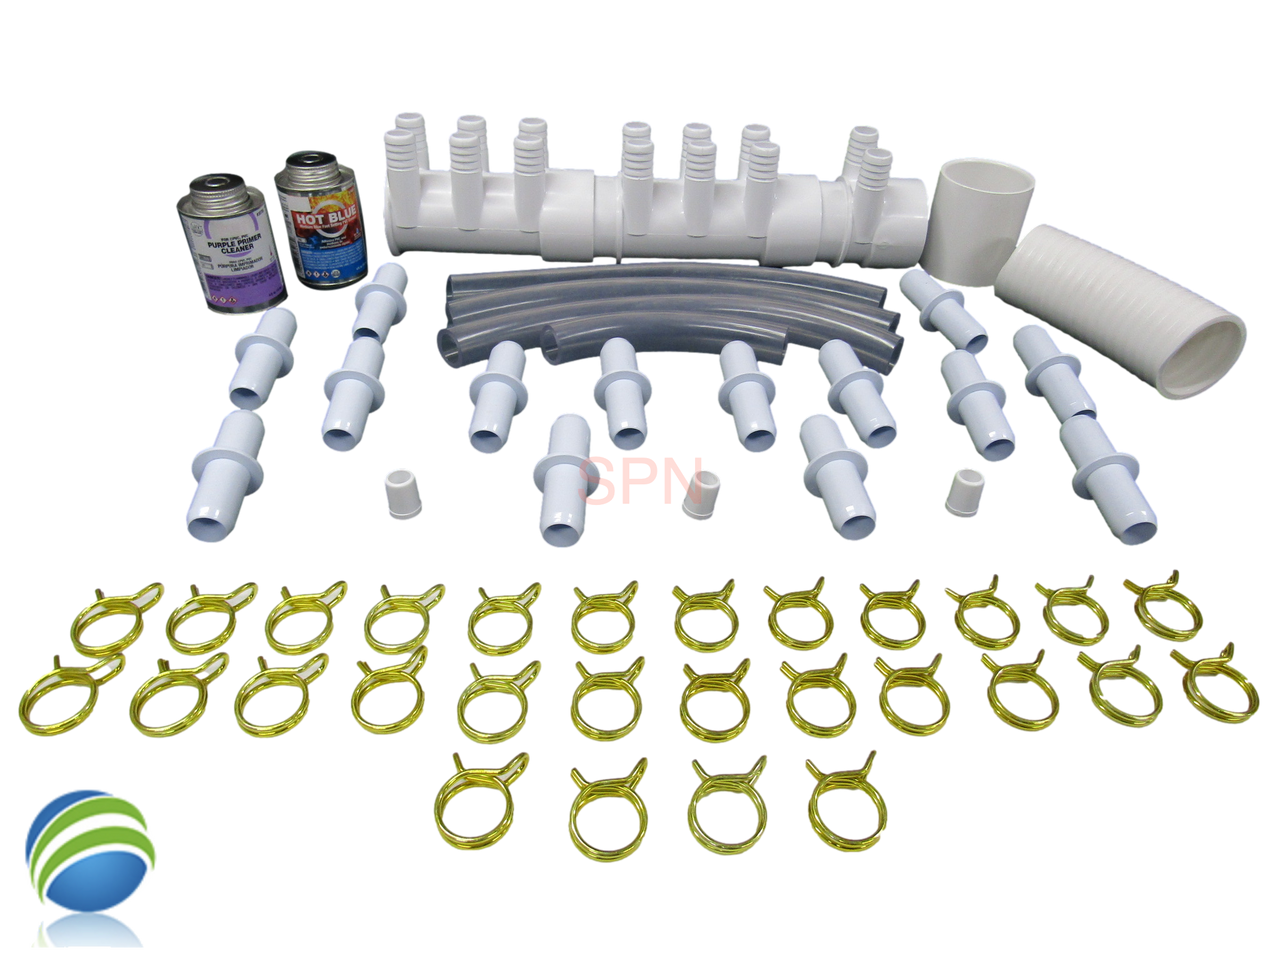 Manifold Hot Tub Spa Dead End (14) 3/4" Outlets with Coupler & Glue Kit Video How To